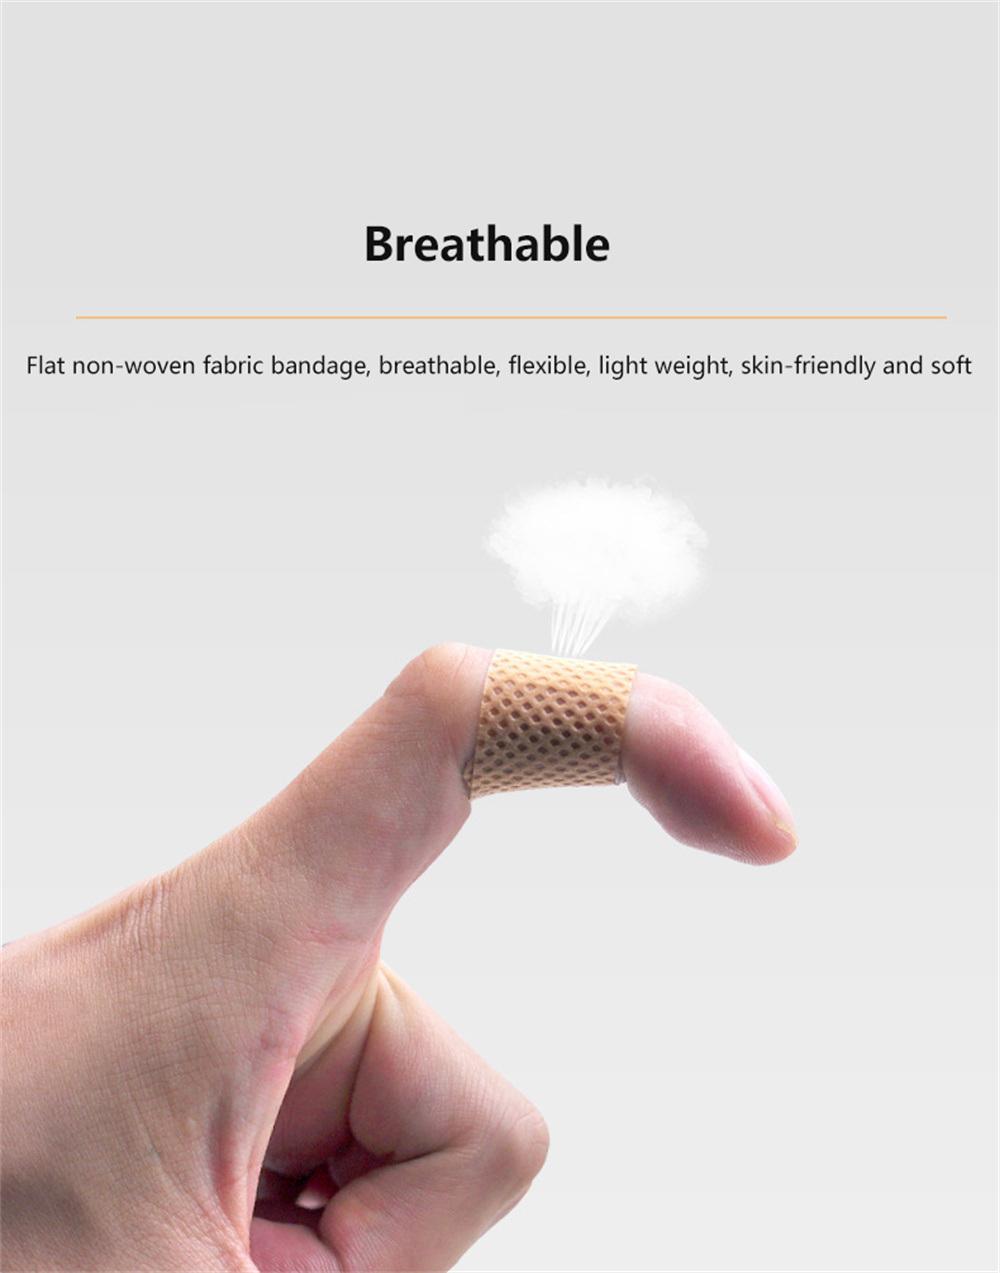 Band-Aid Waterproof Breathable Household Hemostatic Patch Anti-Wear Foot Band-Aid